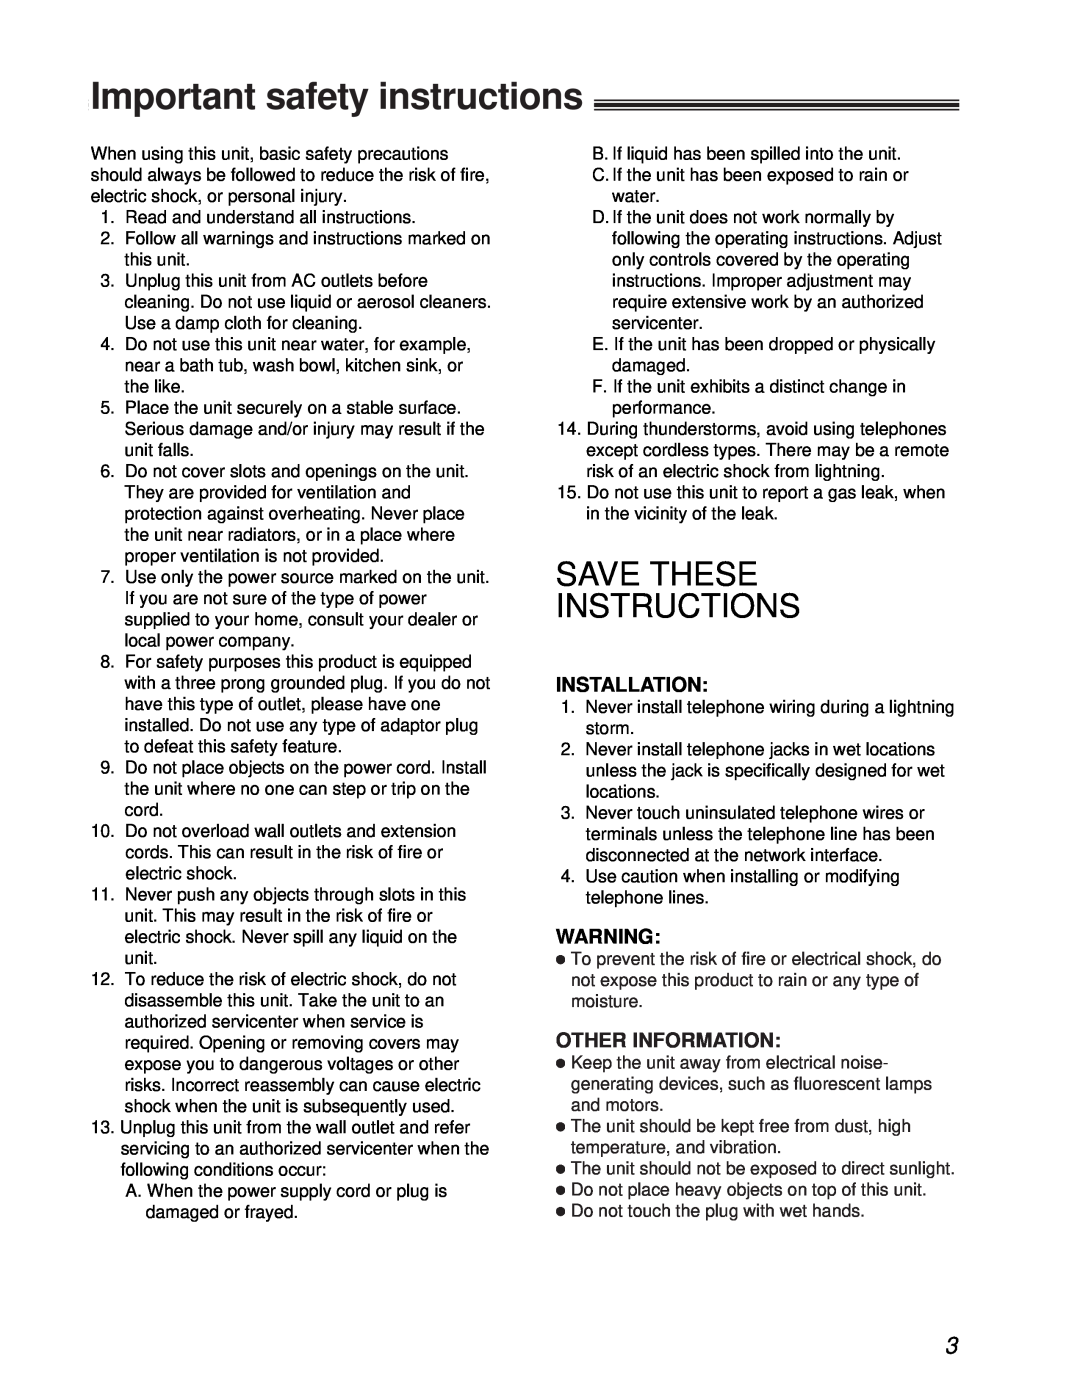 Panasonic KX-FT31BX quick start Important safety instructions, Save These Instructions, Installation, Other Information 